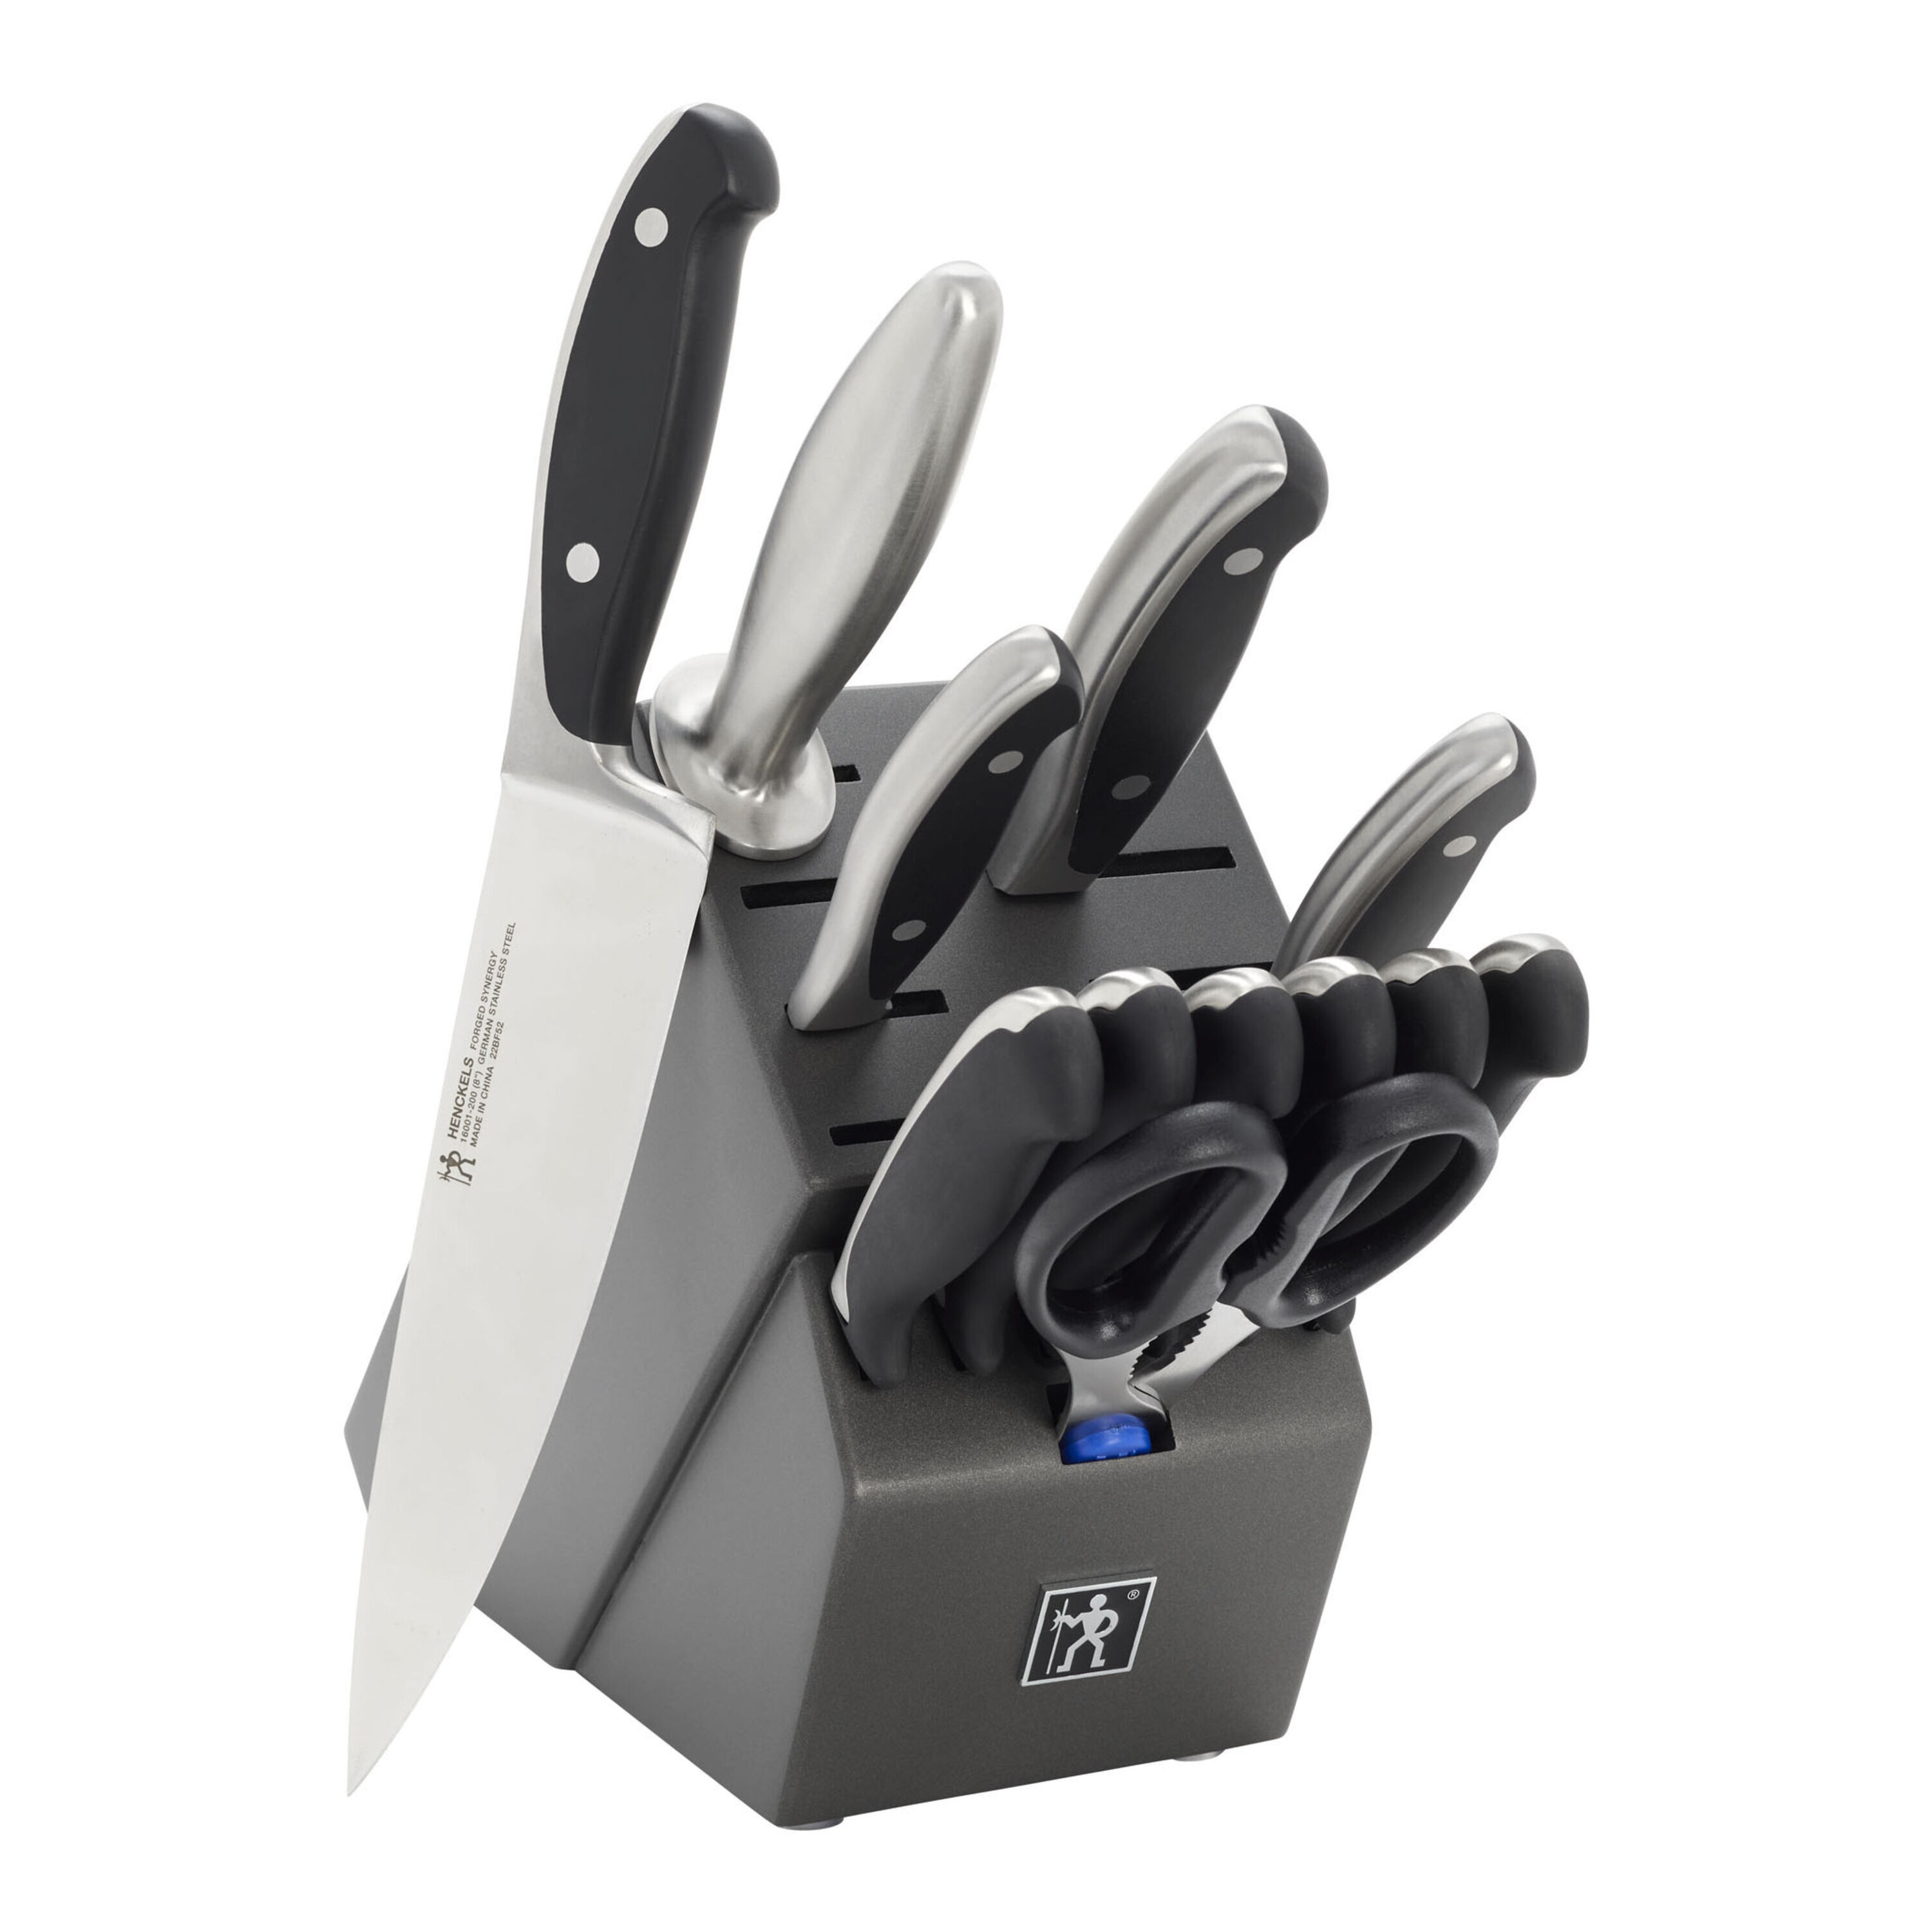 Henckels Forged Synergy 13-Piece Knife Block Set 16020-000 - The